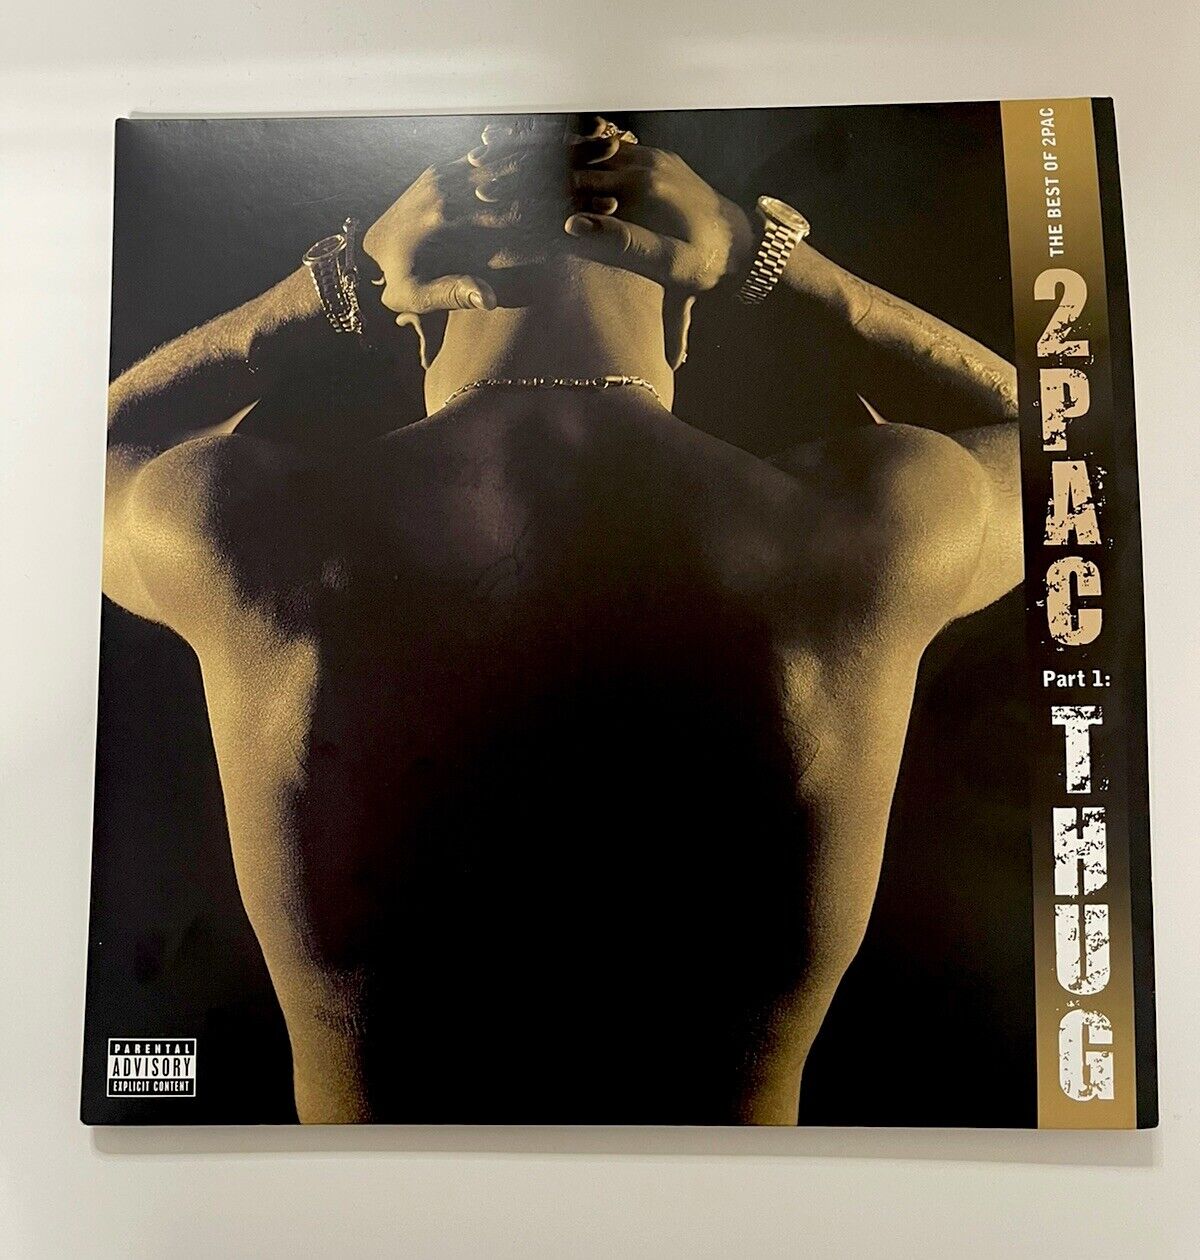 2Pac Record Album (The Best Of 2pac - Part 1: Thug)